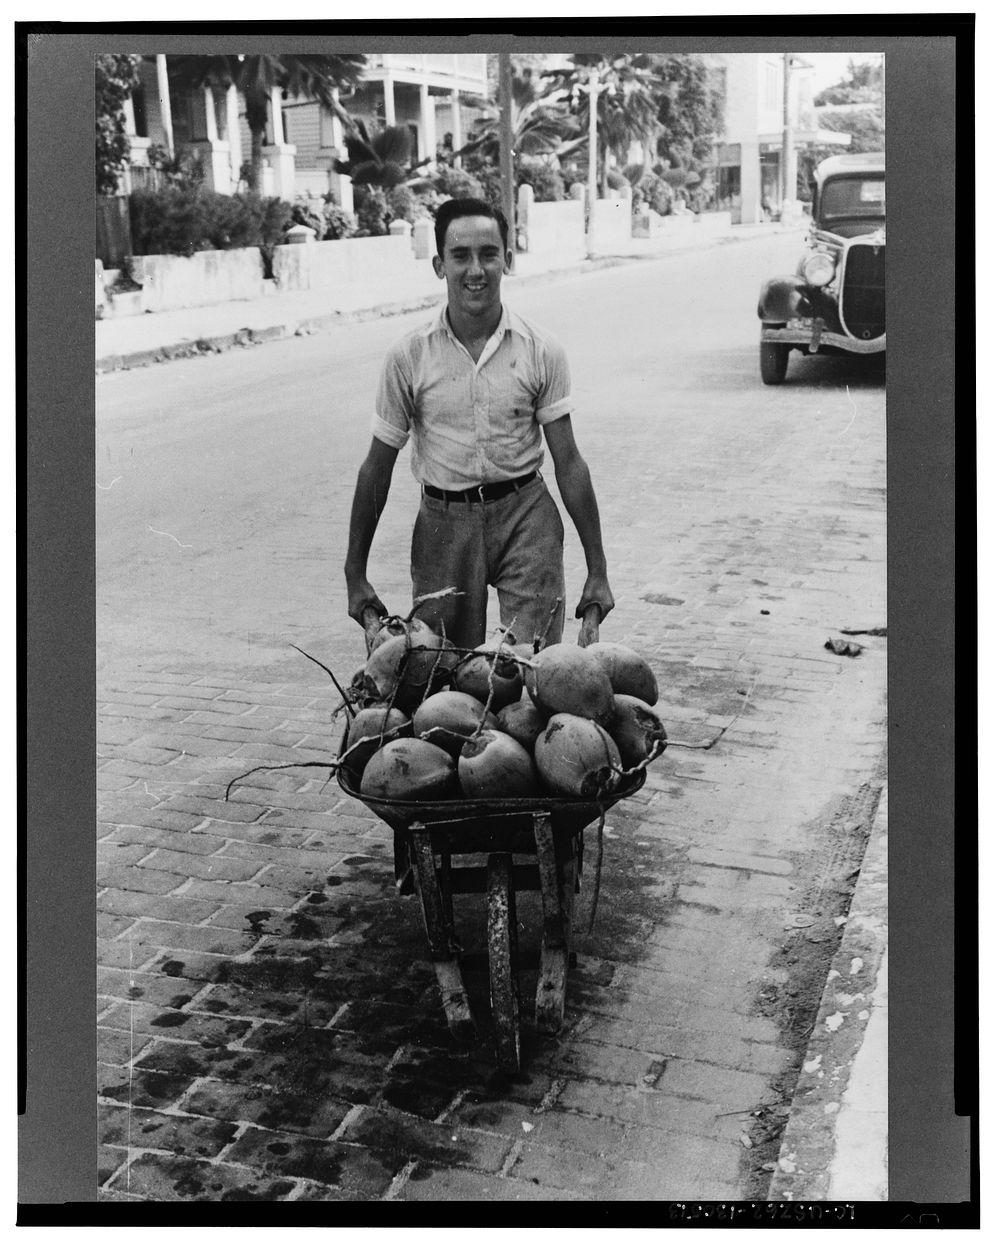 Coconuts, Key West, Florida. Sourced from the Library of Congress.